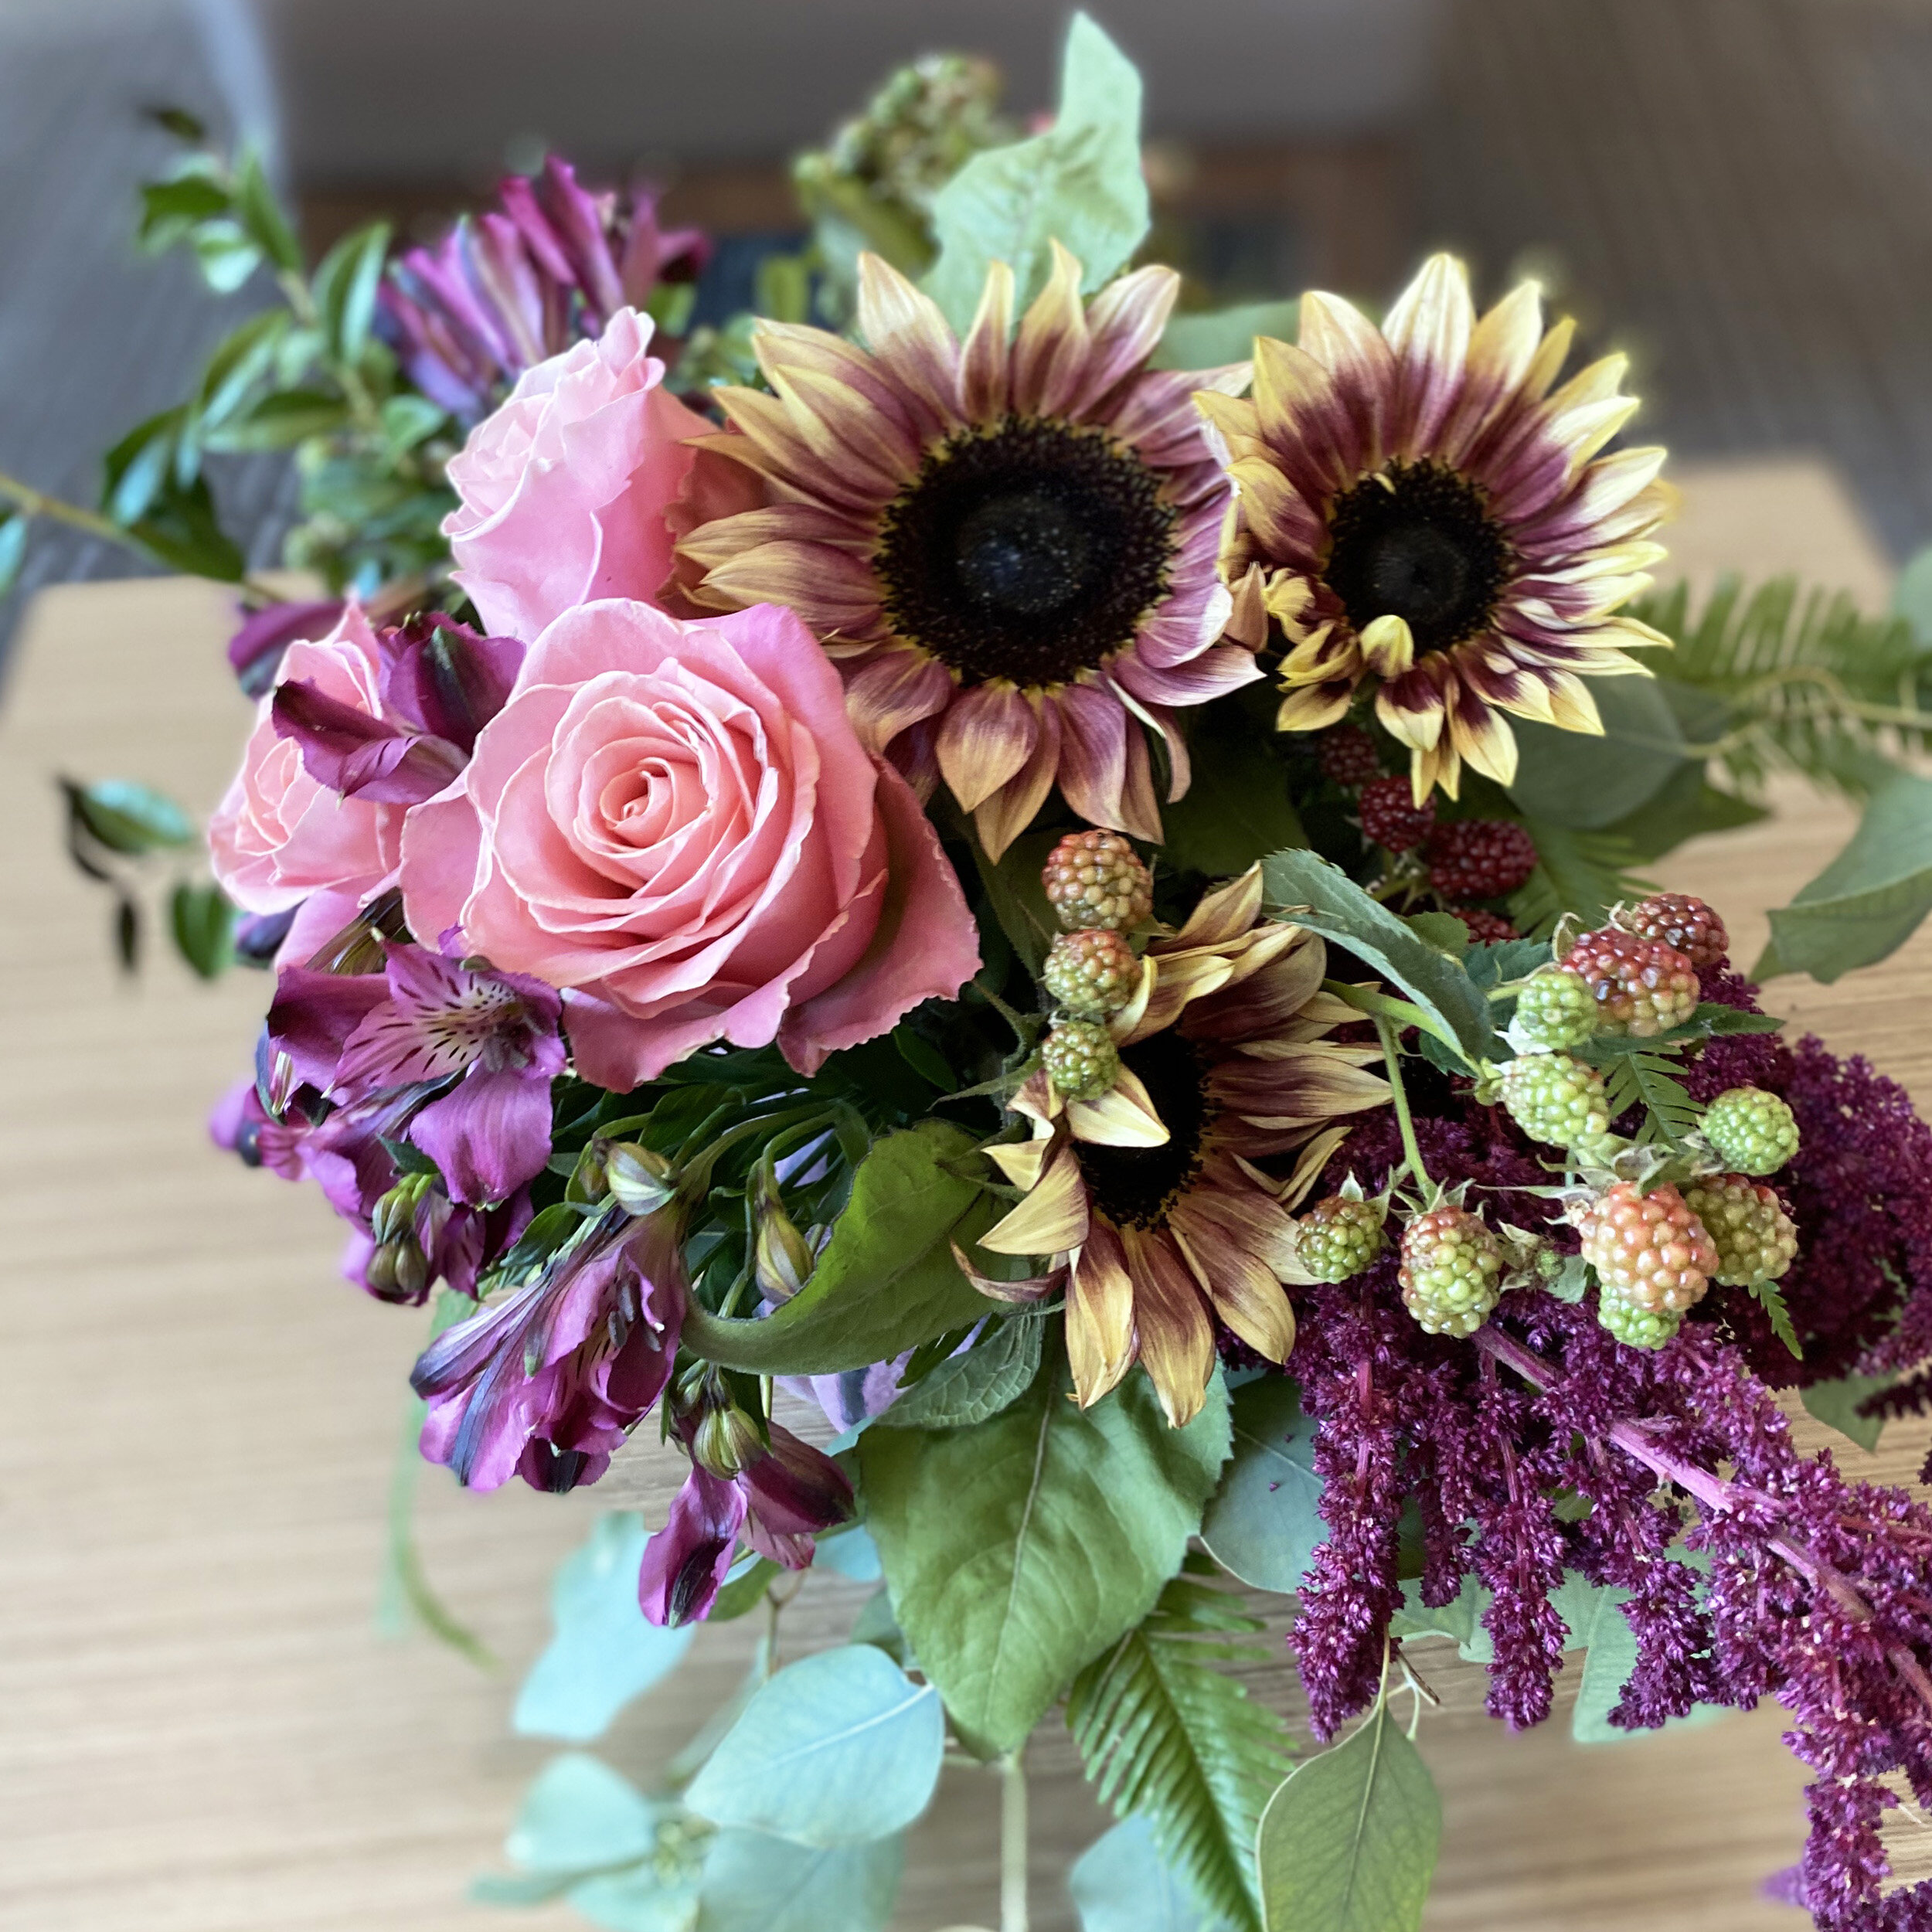 flowers for delivery in denver metro area.jpg